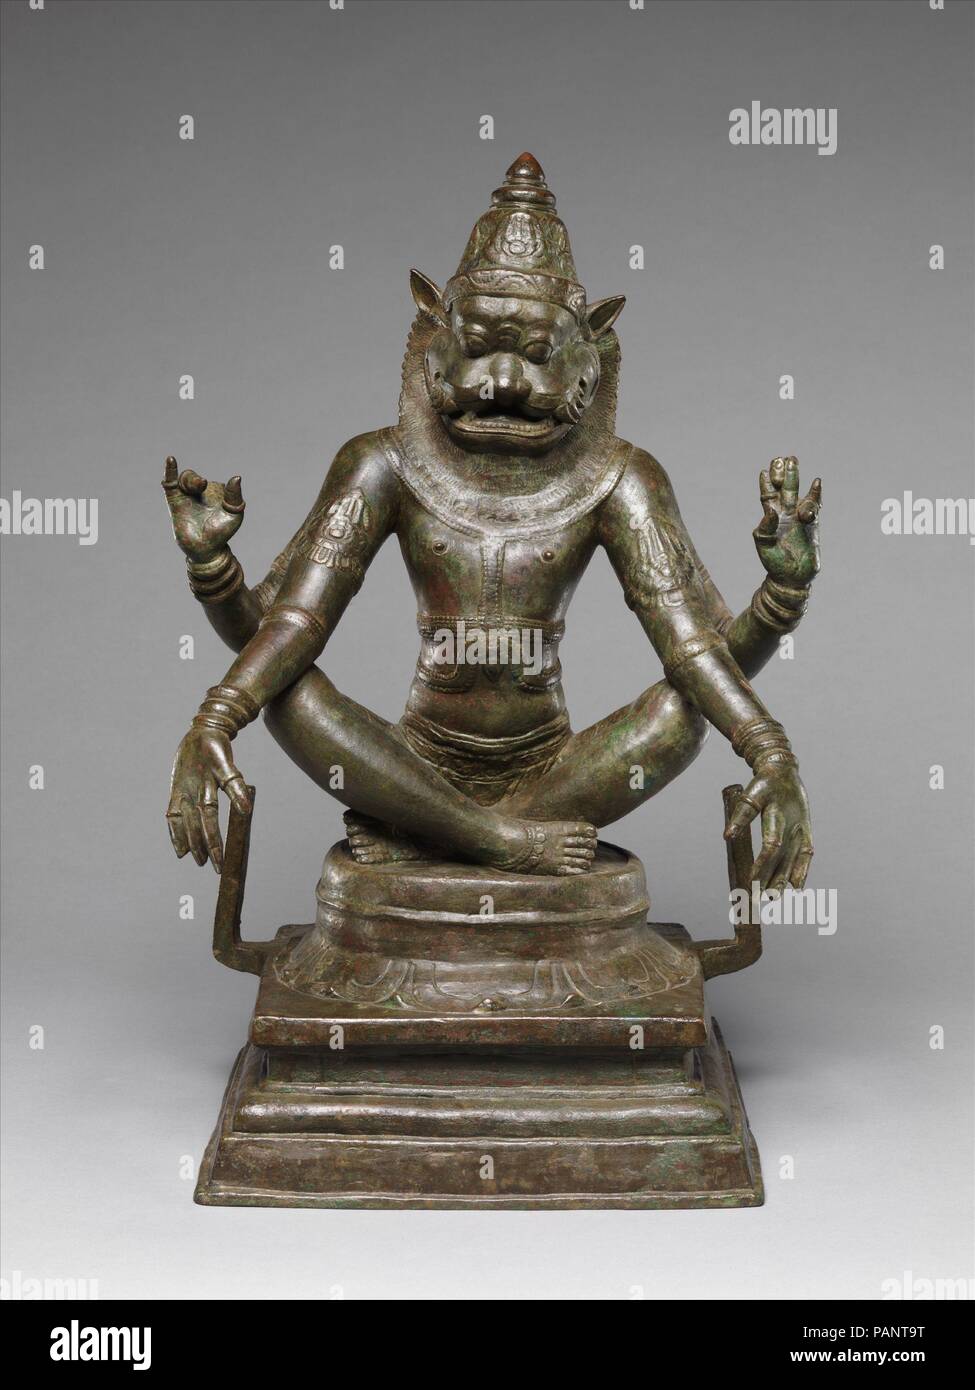 Yoga Narasimha, Vishnu's Man-Lion Incarnation. Culture: India (Tamil Nadu). Dimensions: H. 18 3/4 (47.6 cm); W. 13 in. (33 cm); D. 9 1/2 in. (24.1 cm). Date: 12th century.  Narasimha was an avatar of Vishnu who appeared on earth to slay the evil ruler Hiranyakashipu, who believed himself to be invincible after tricking Brahma into granting him a protective spell. Narasimha is venerated as an embodiment of valor and martial strength; here, he assumes the pose of a meditative yogi after successfully outwitting and slaying the evil king. Narasimha is thus praised as the bringer of peace and order Stock Photo